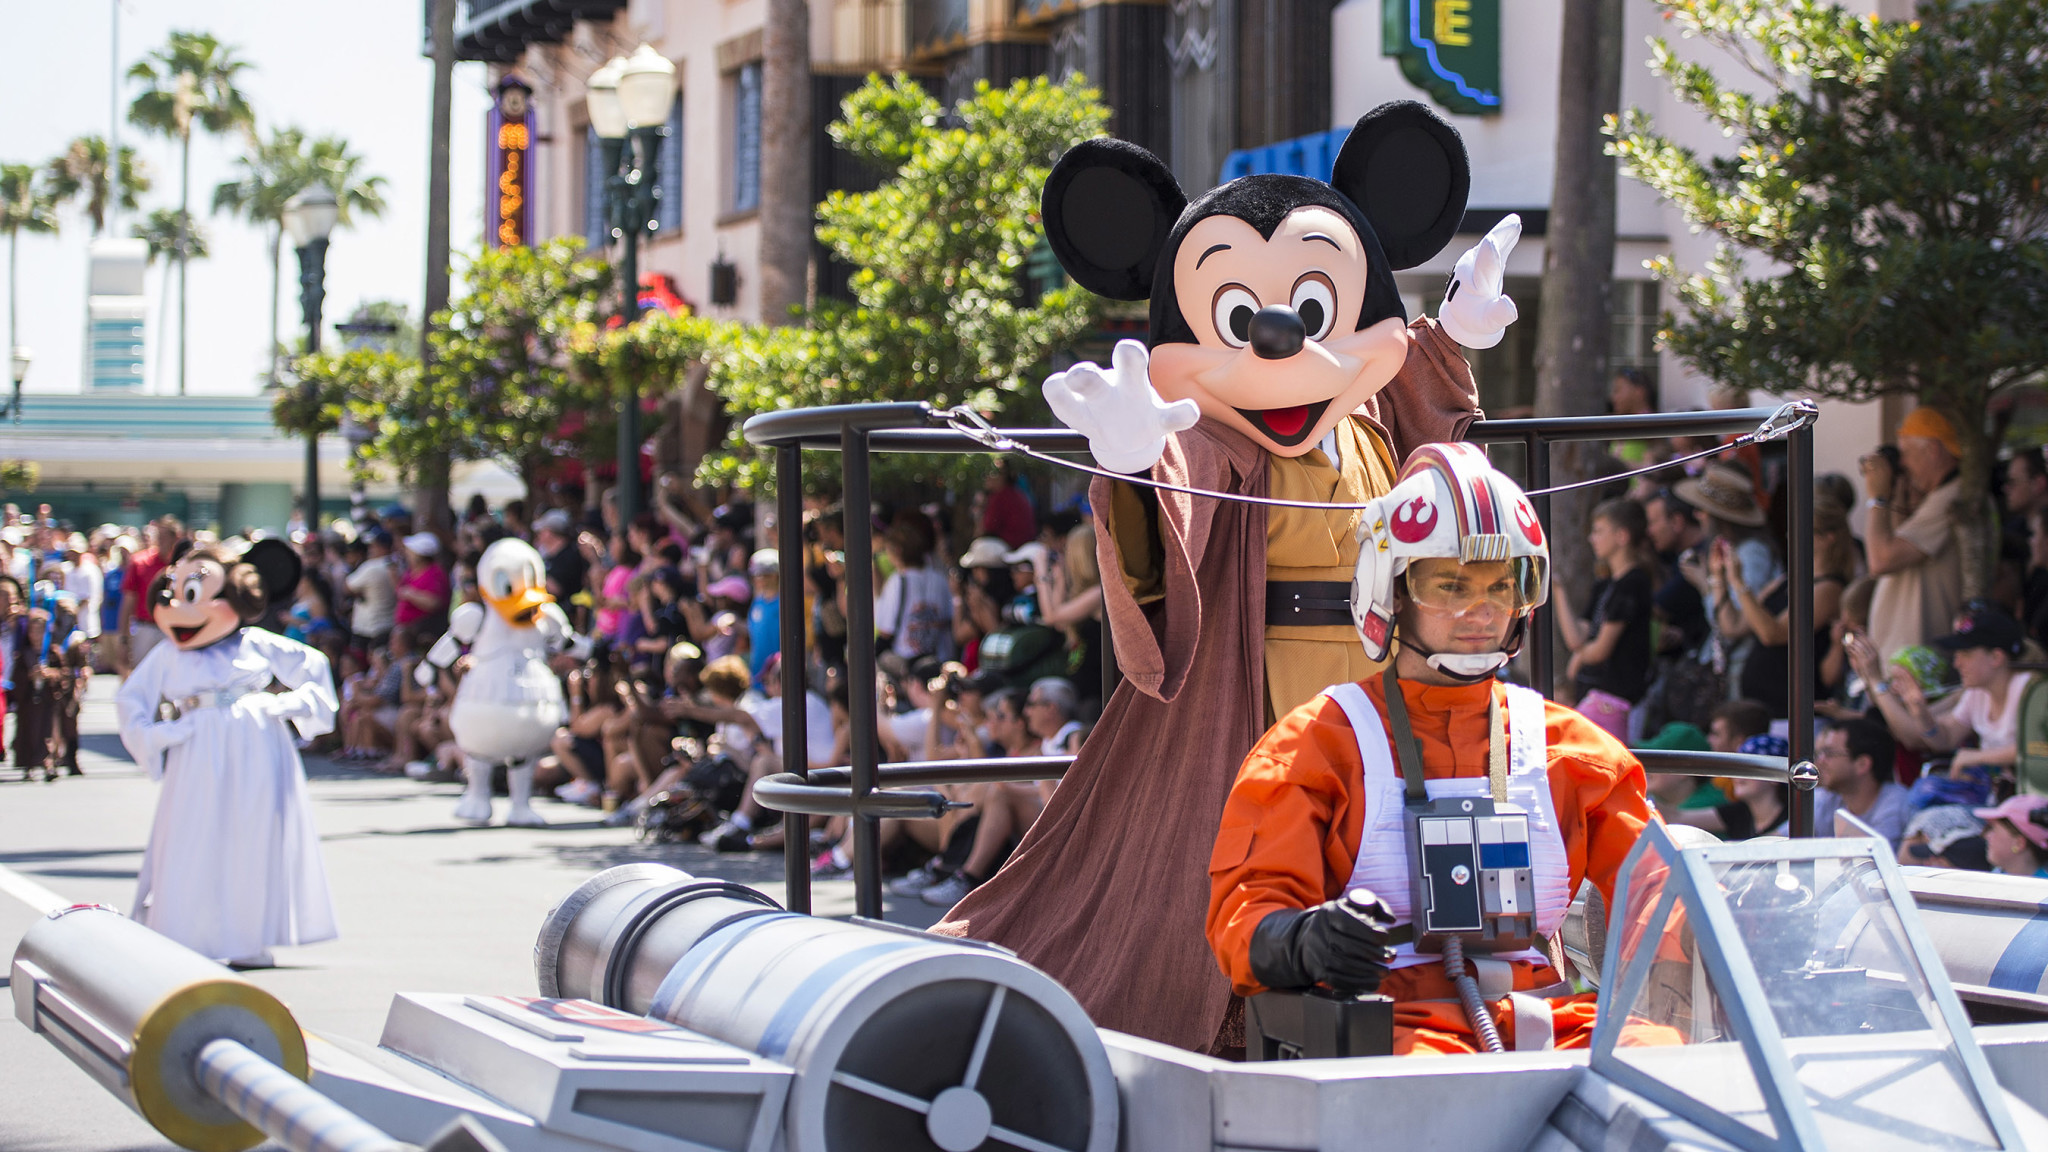 The Power of the Force Takes Over Disney’s Hollywood Studios for Star Wars Weekends May 15-June 14, 2015